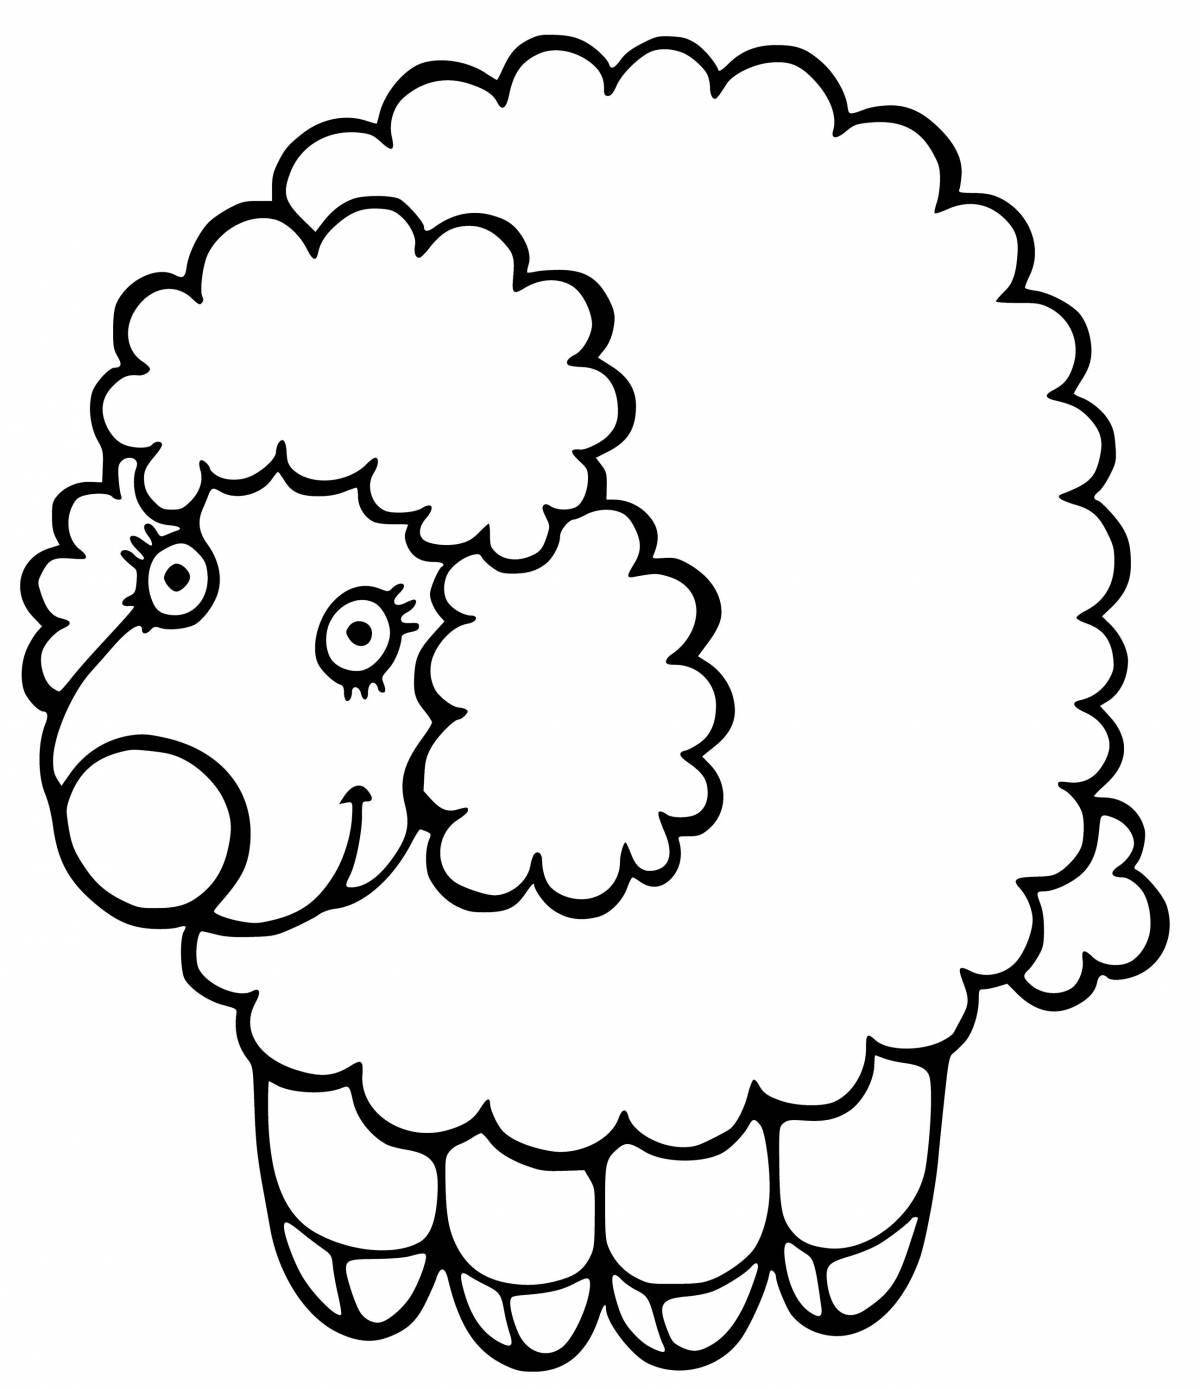 Coloring sheep for children 2-3 years old